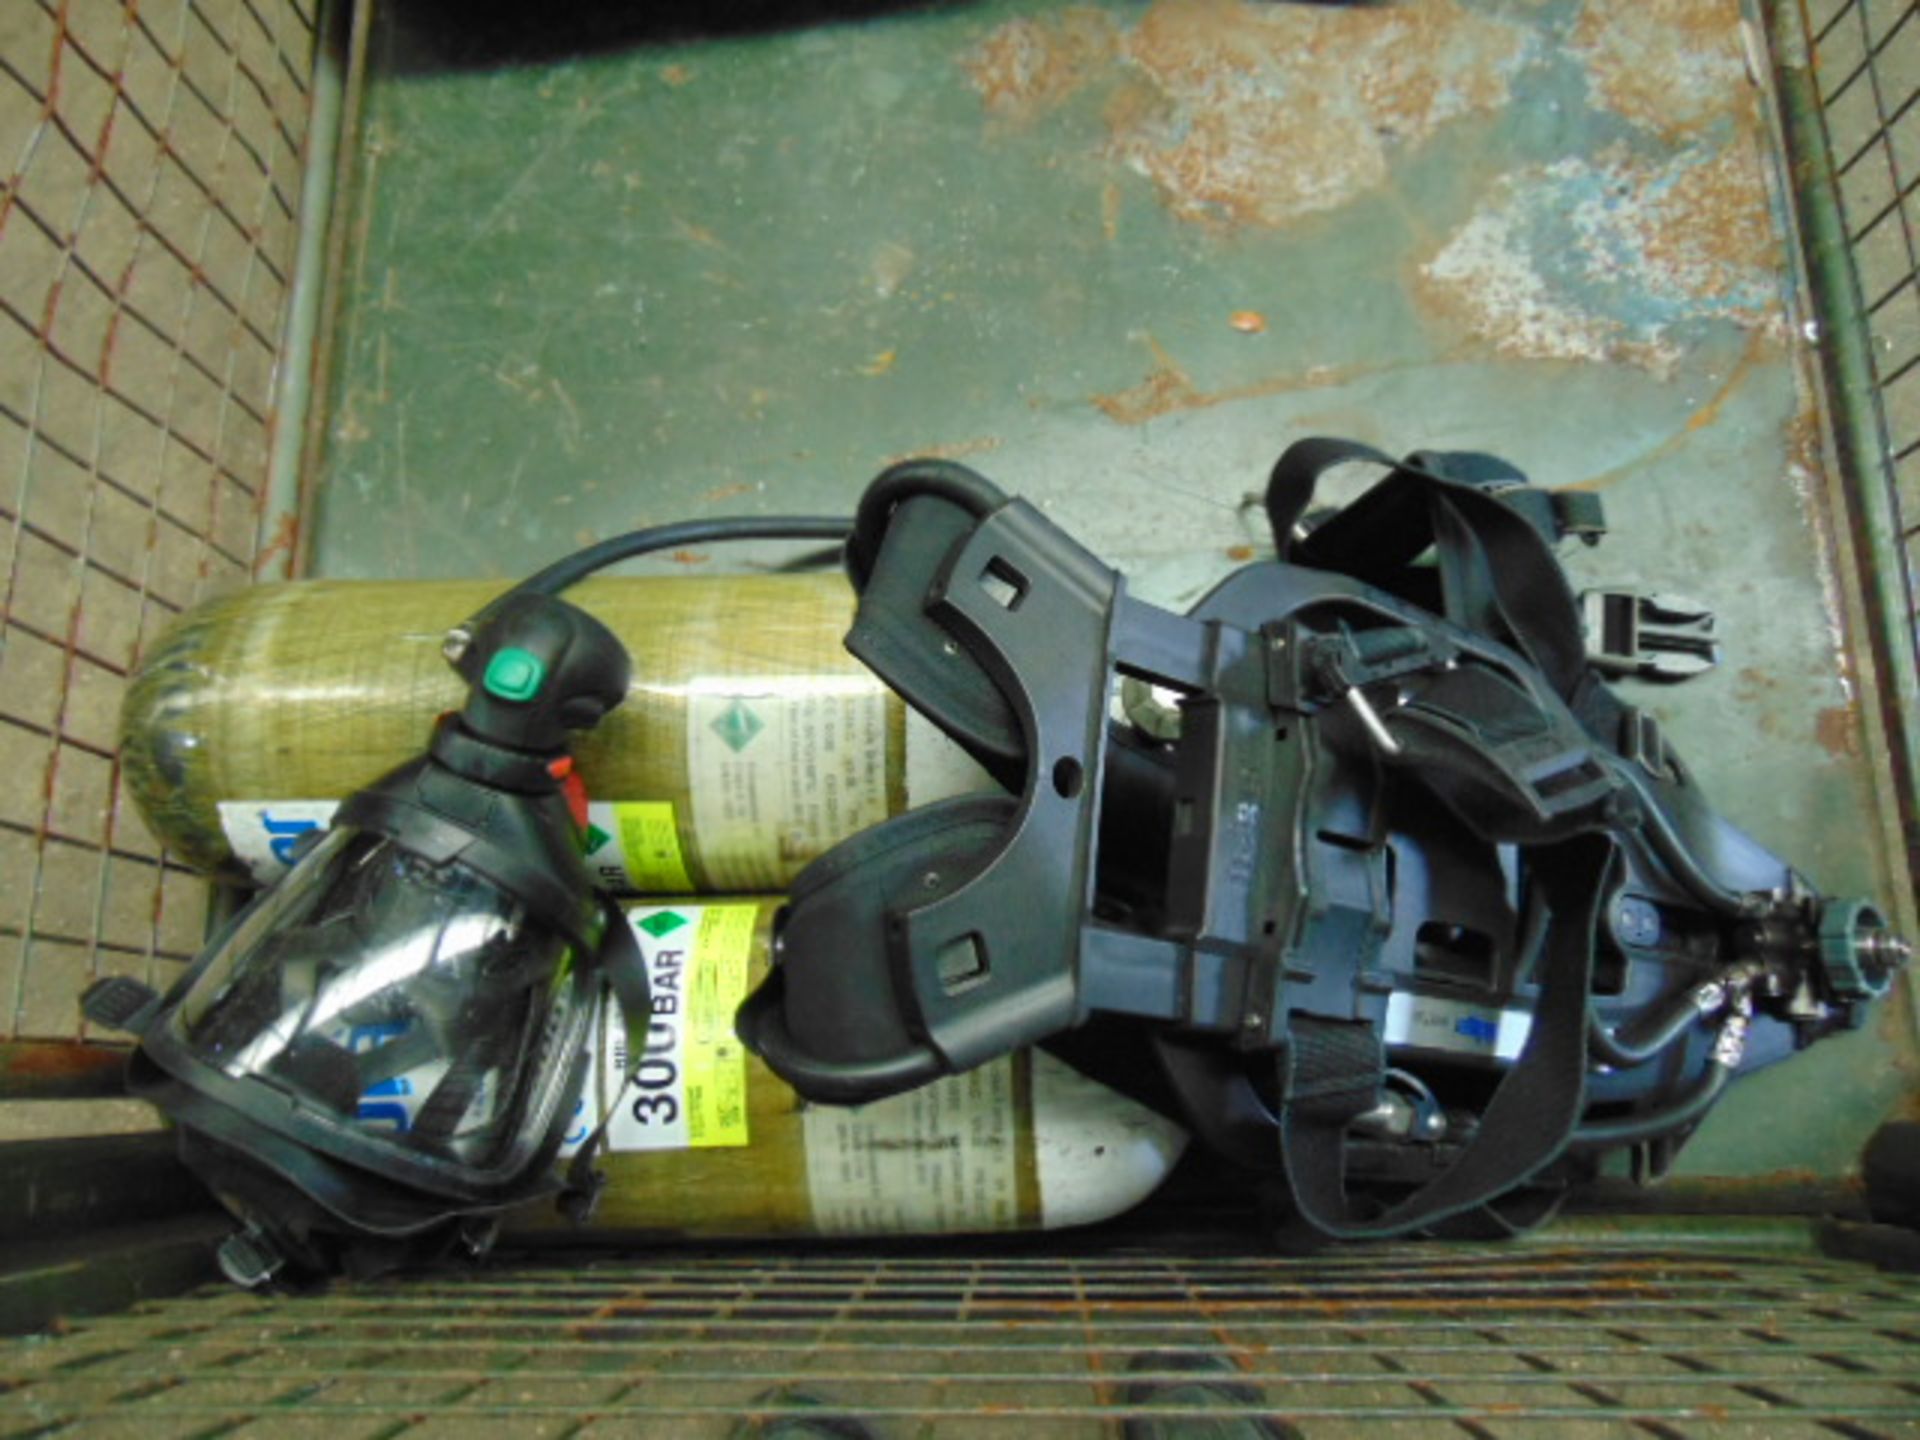 Drager PSS 7000 Self Contained Breathing Apparatus w/ 2 x Drager 300 Bar Air Cylinders - Image 20 of 22